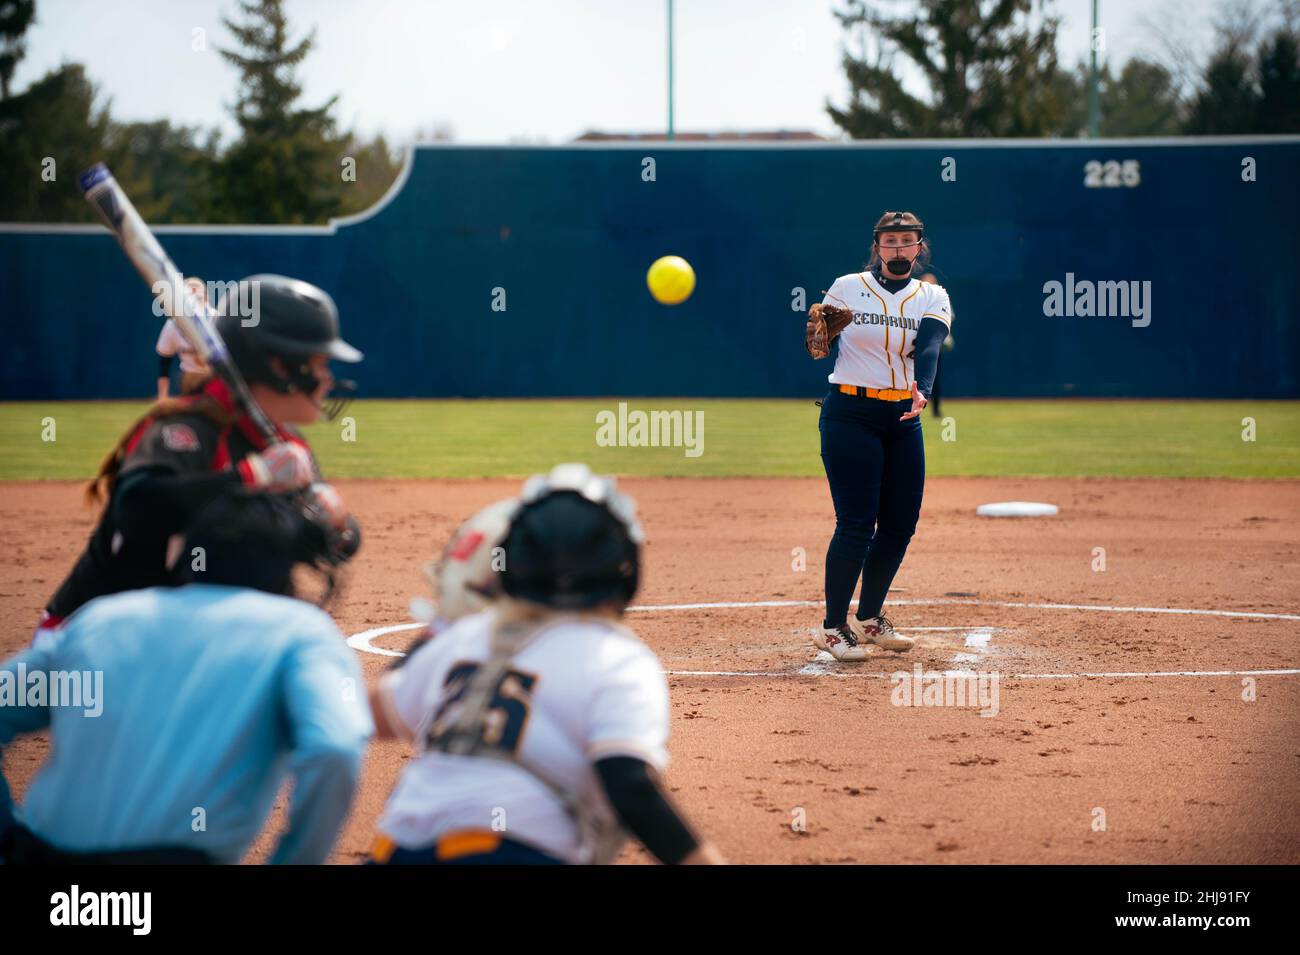 University/college women's softball pitcher pitching the ball in mid air with the batter, catcher, and umpire in the foreground Stock Photo